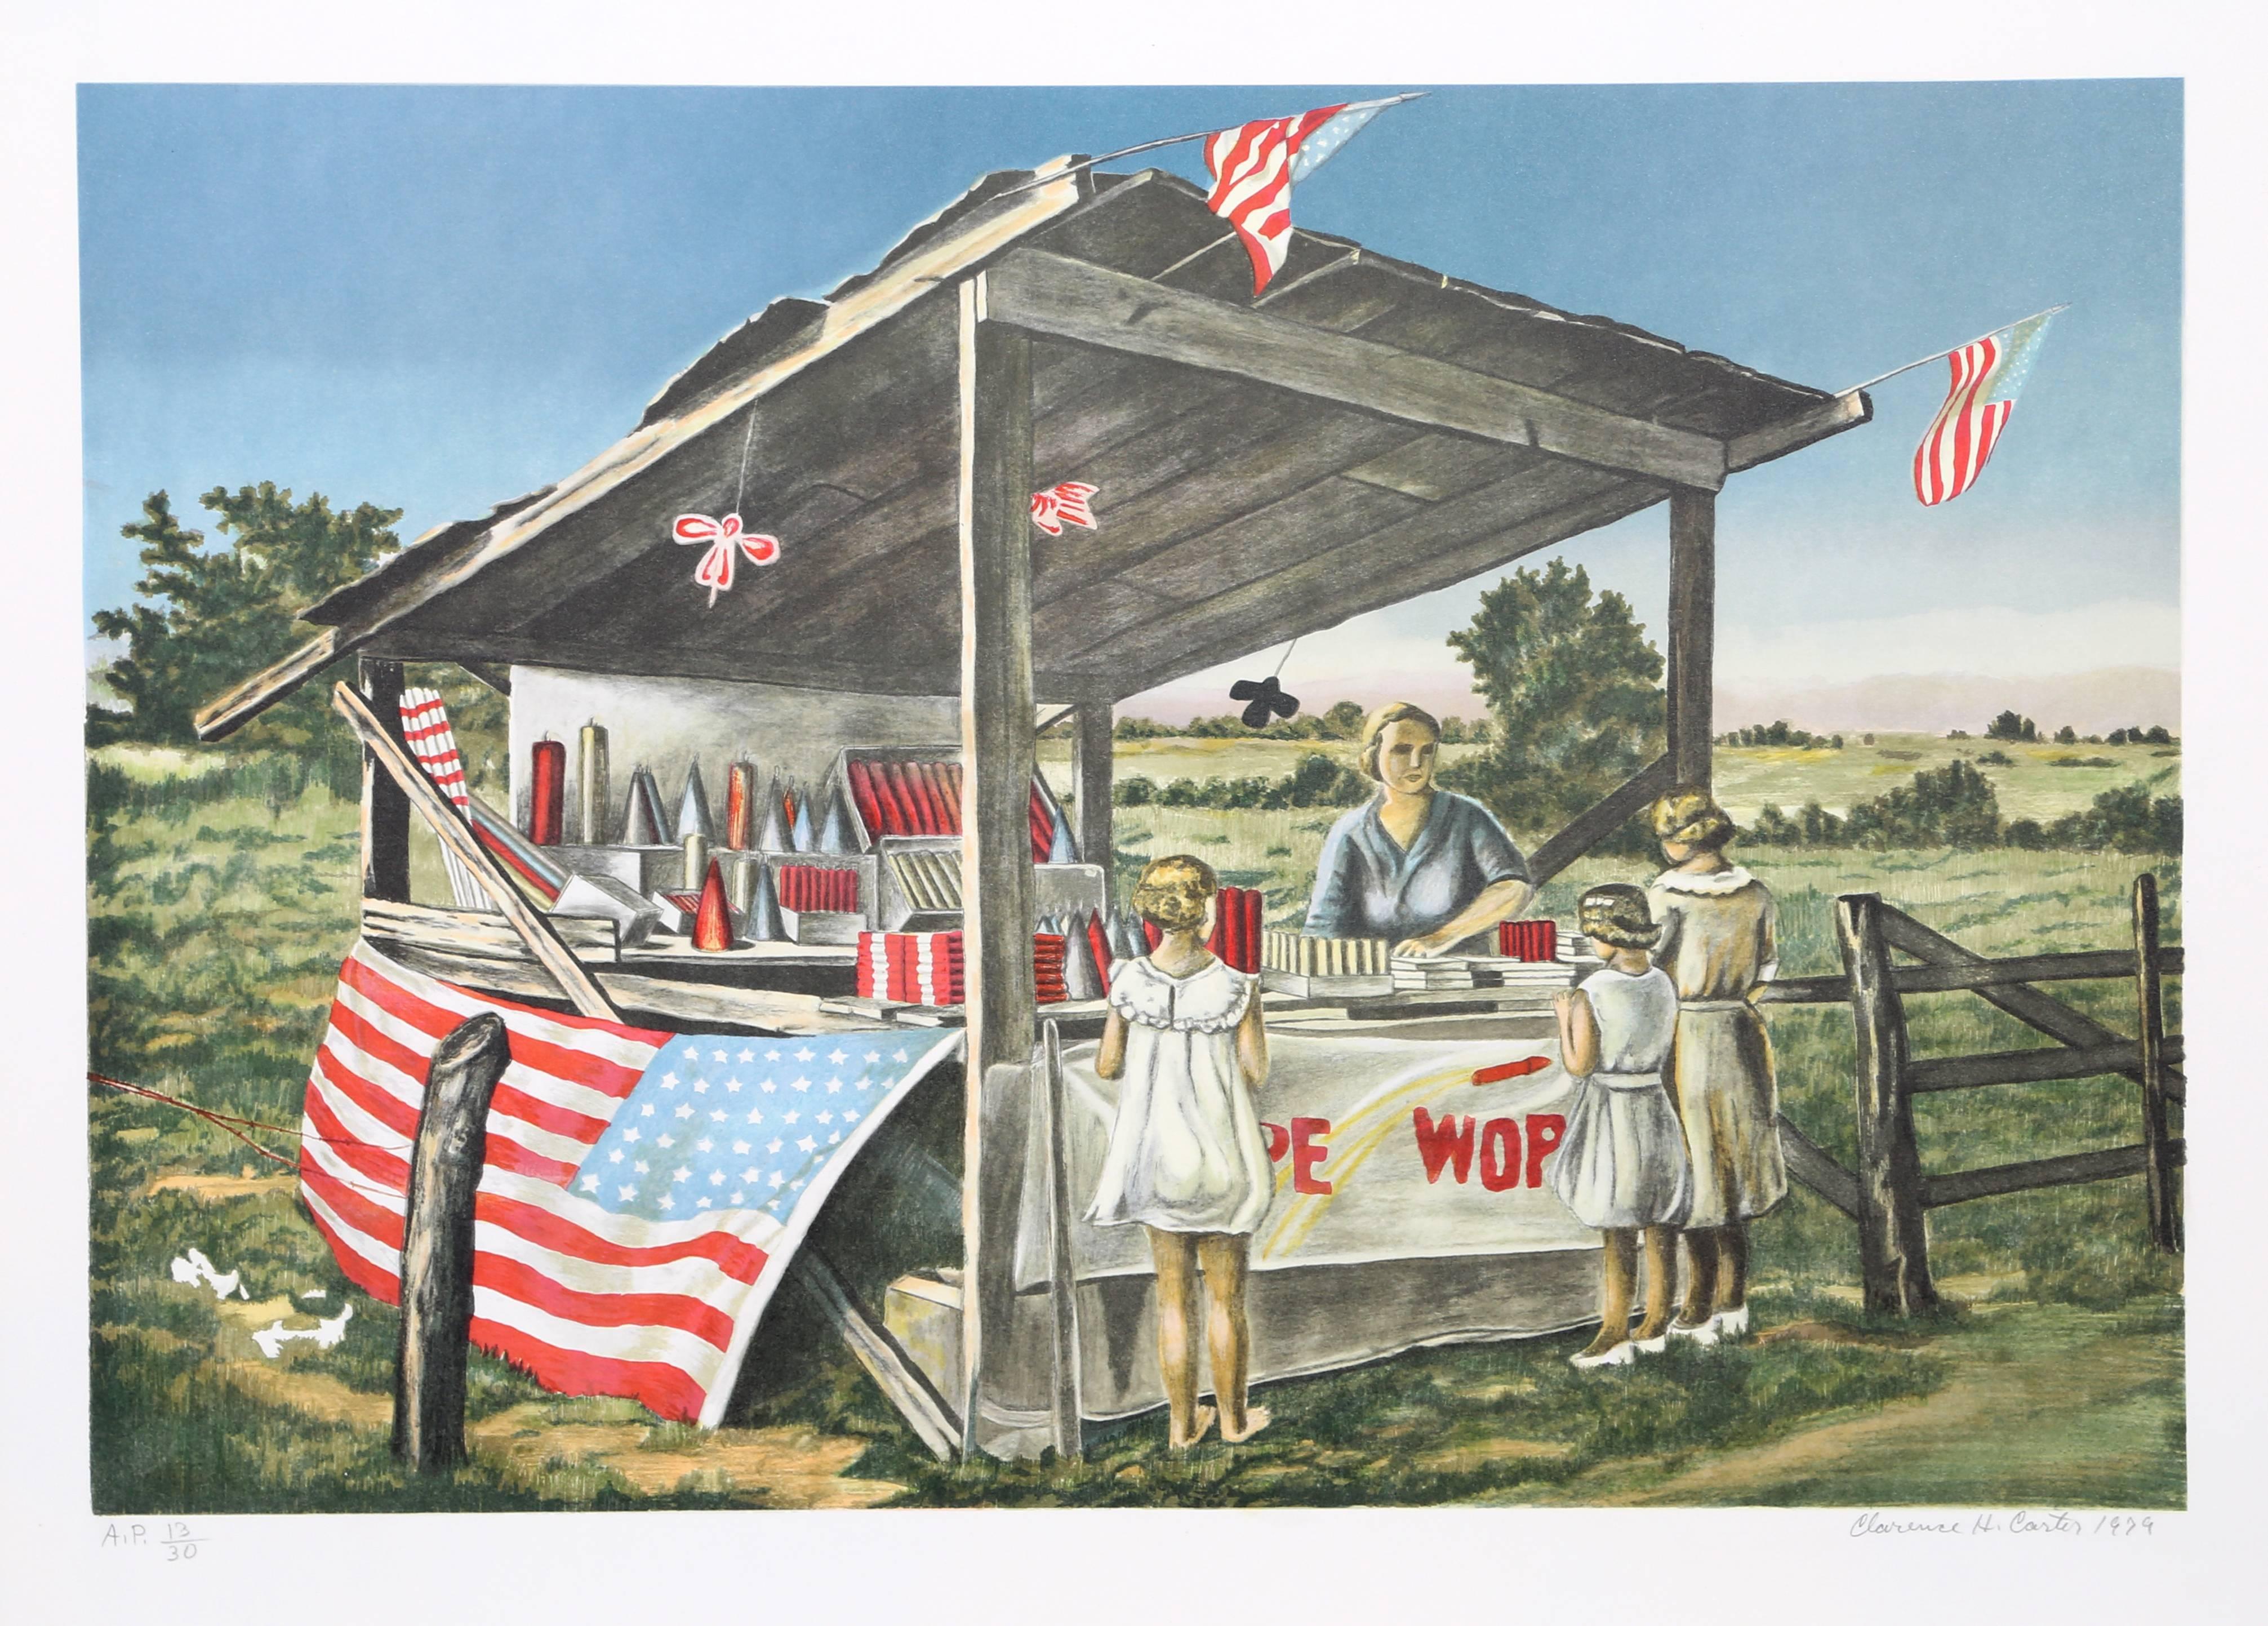 Artist: Clarence Carter Holbrook
Title: Outside the Limits (Fireworks Stand)
Year: 1979
Medium: Lithograph, signed and numbered in pencil 
Edition: AP 30
Image Size: 17 x 25 inches 
Paper Size: 21 in. x 28 in. (53.34 cm x 71.12 cm)